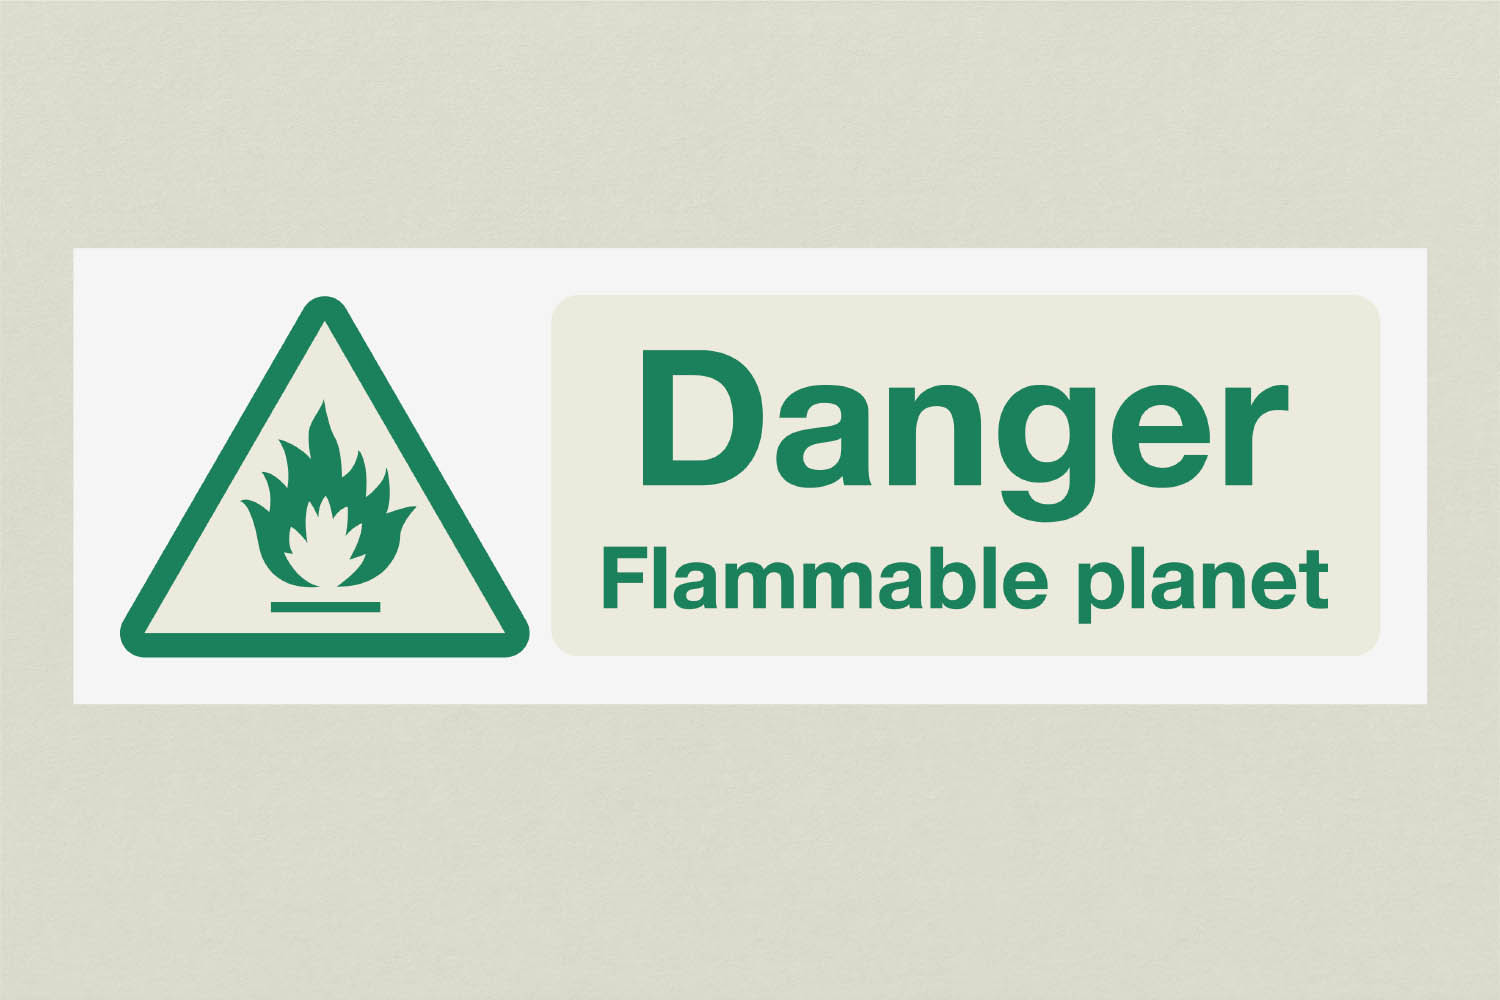 A warning sign which reads 'Danger, Flammable planet'